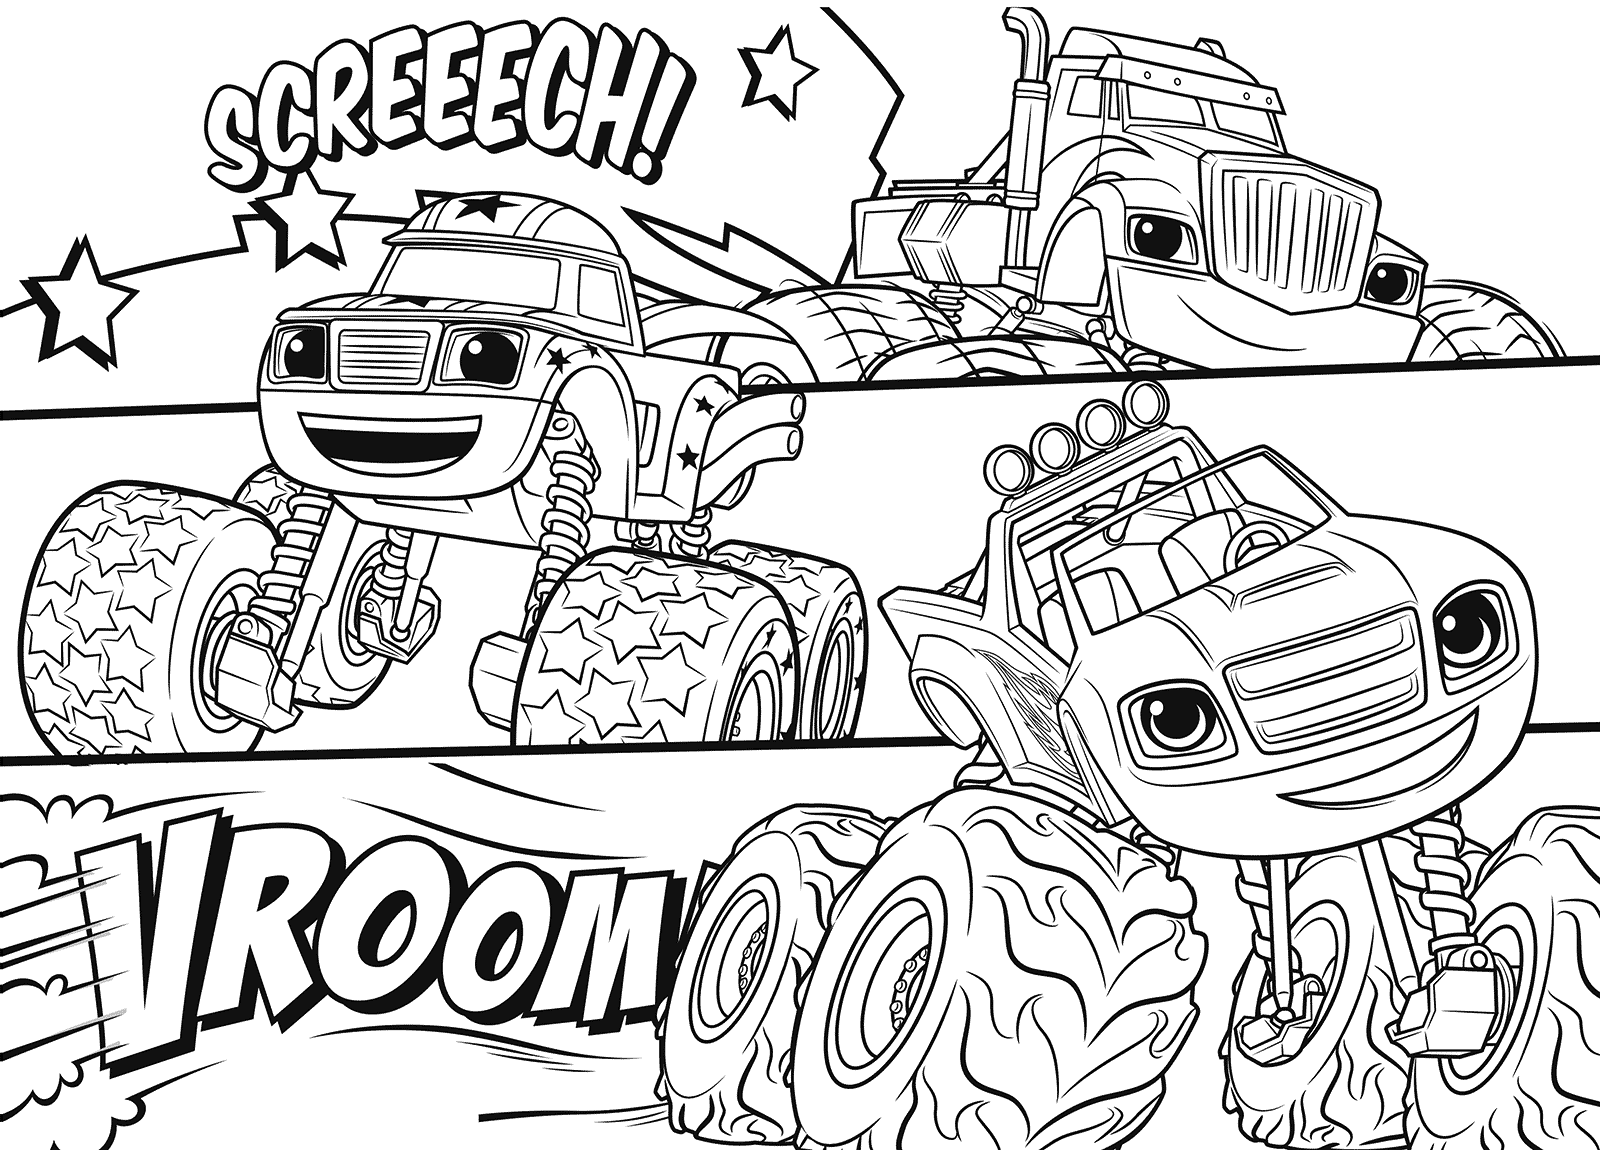 Blaze And The Monster Machines Coloring Pages Best Coloring Pages For Kids